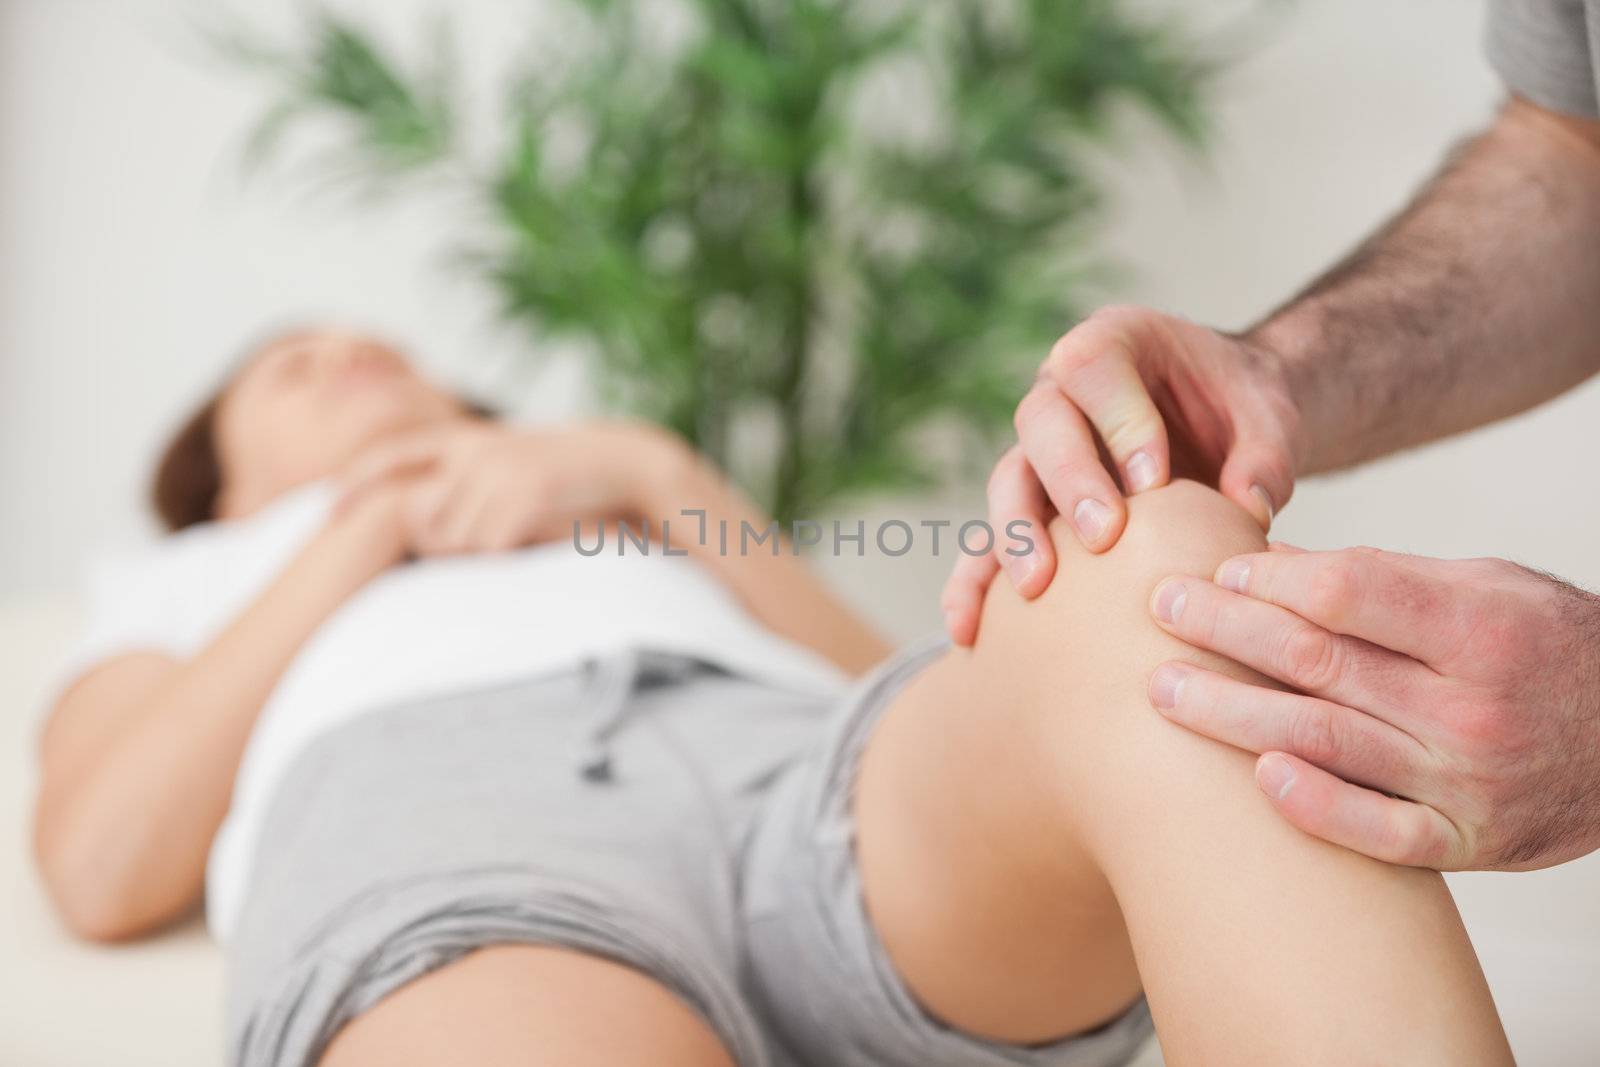 Knee of a woman being touched by a doctor in a room